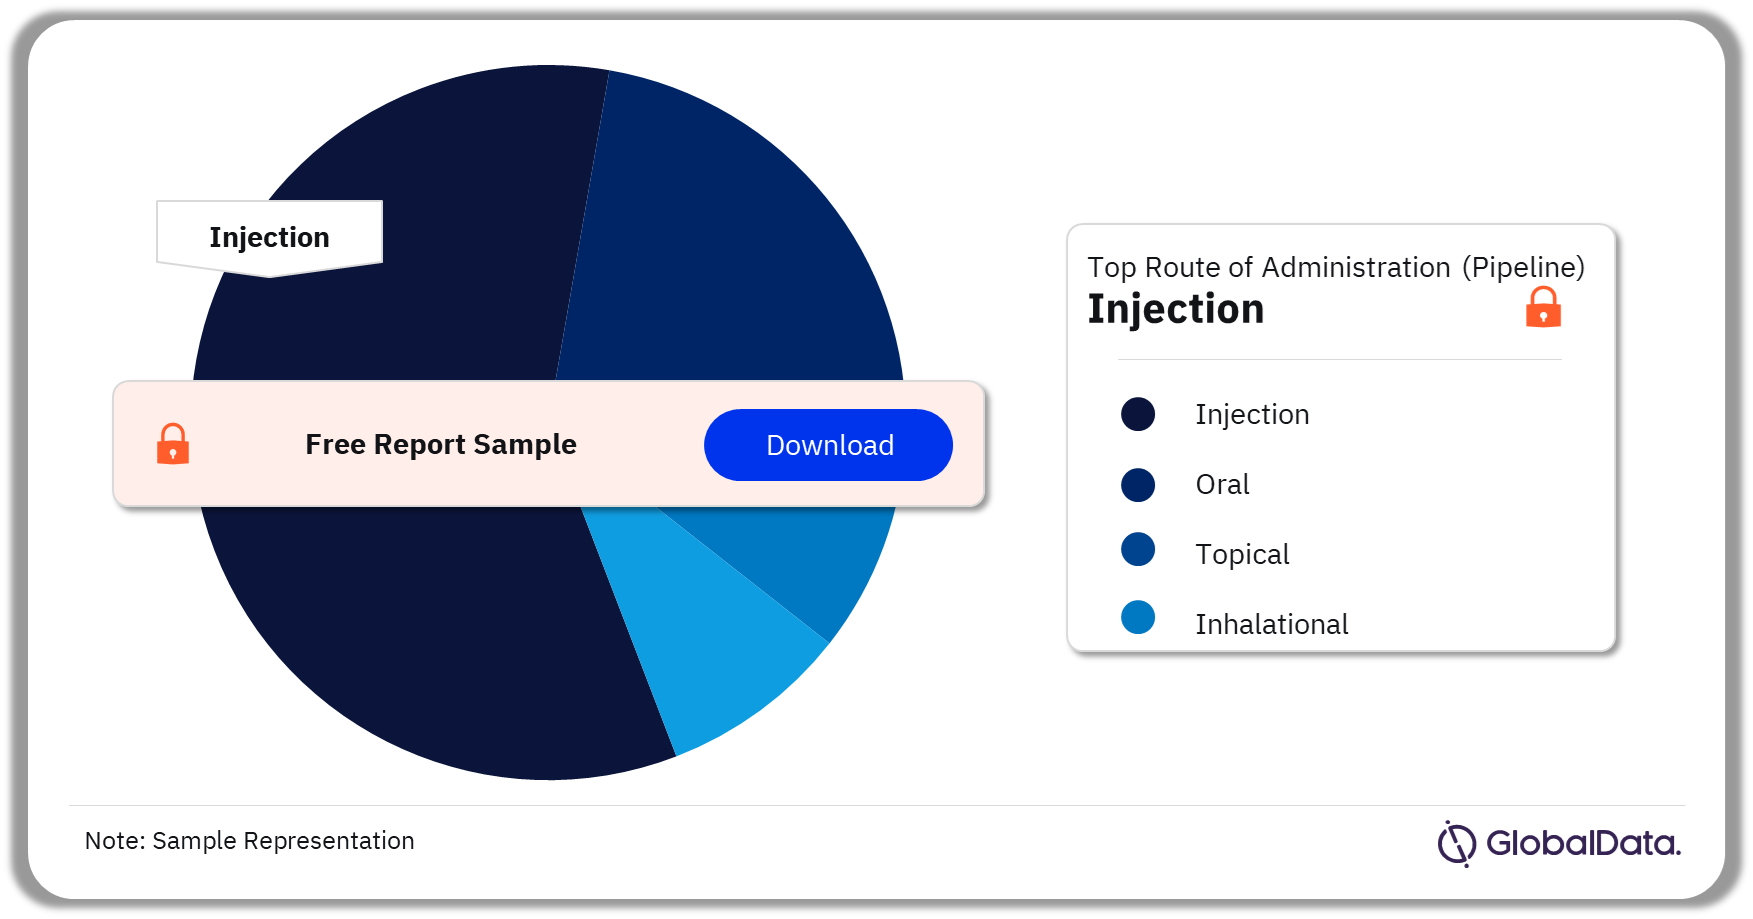 ARF Pipeline Drugs Market Analysis by Routes of Administration, 2023 (%)